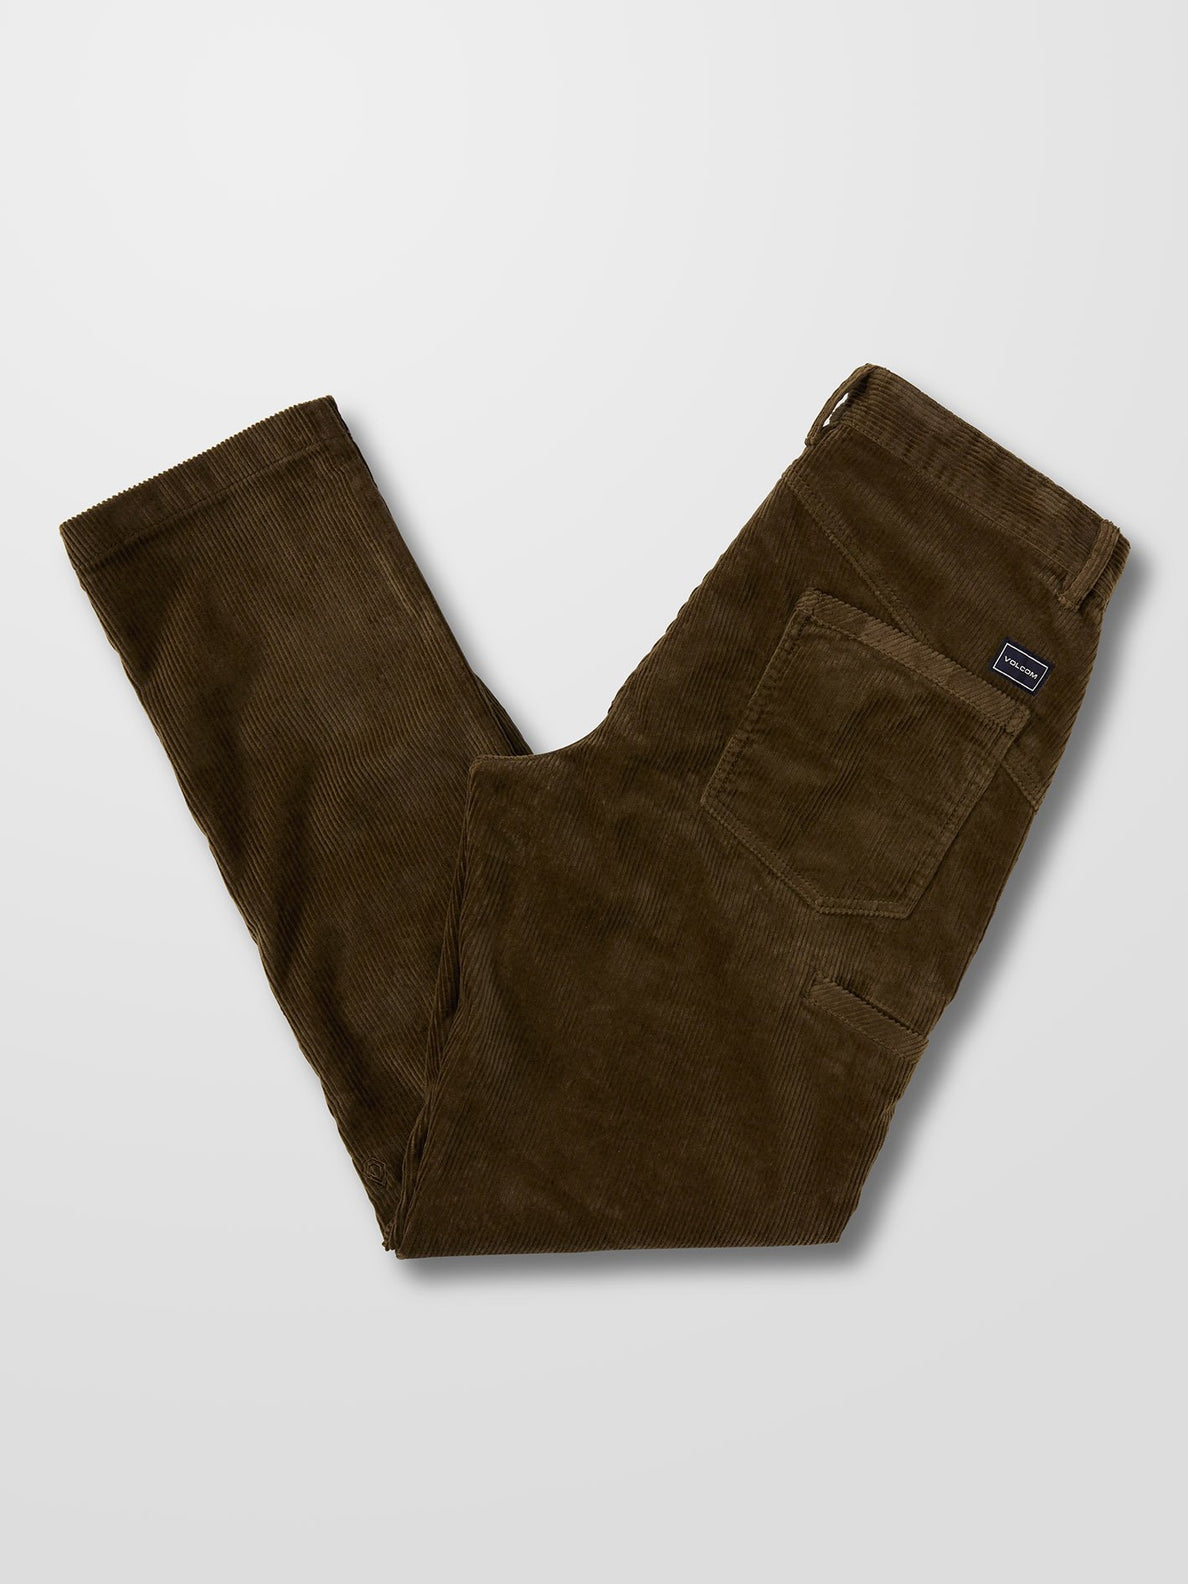 Louie Lopez Tapered Cord Pant - DARK EARTH (A1132100_DKE) [12]